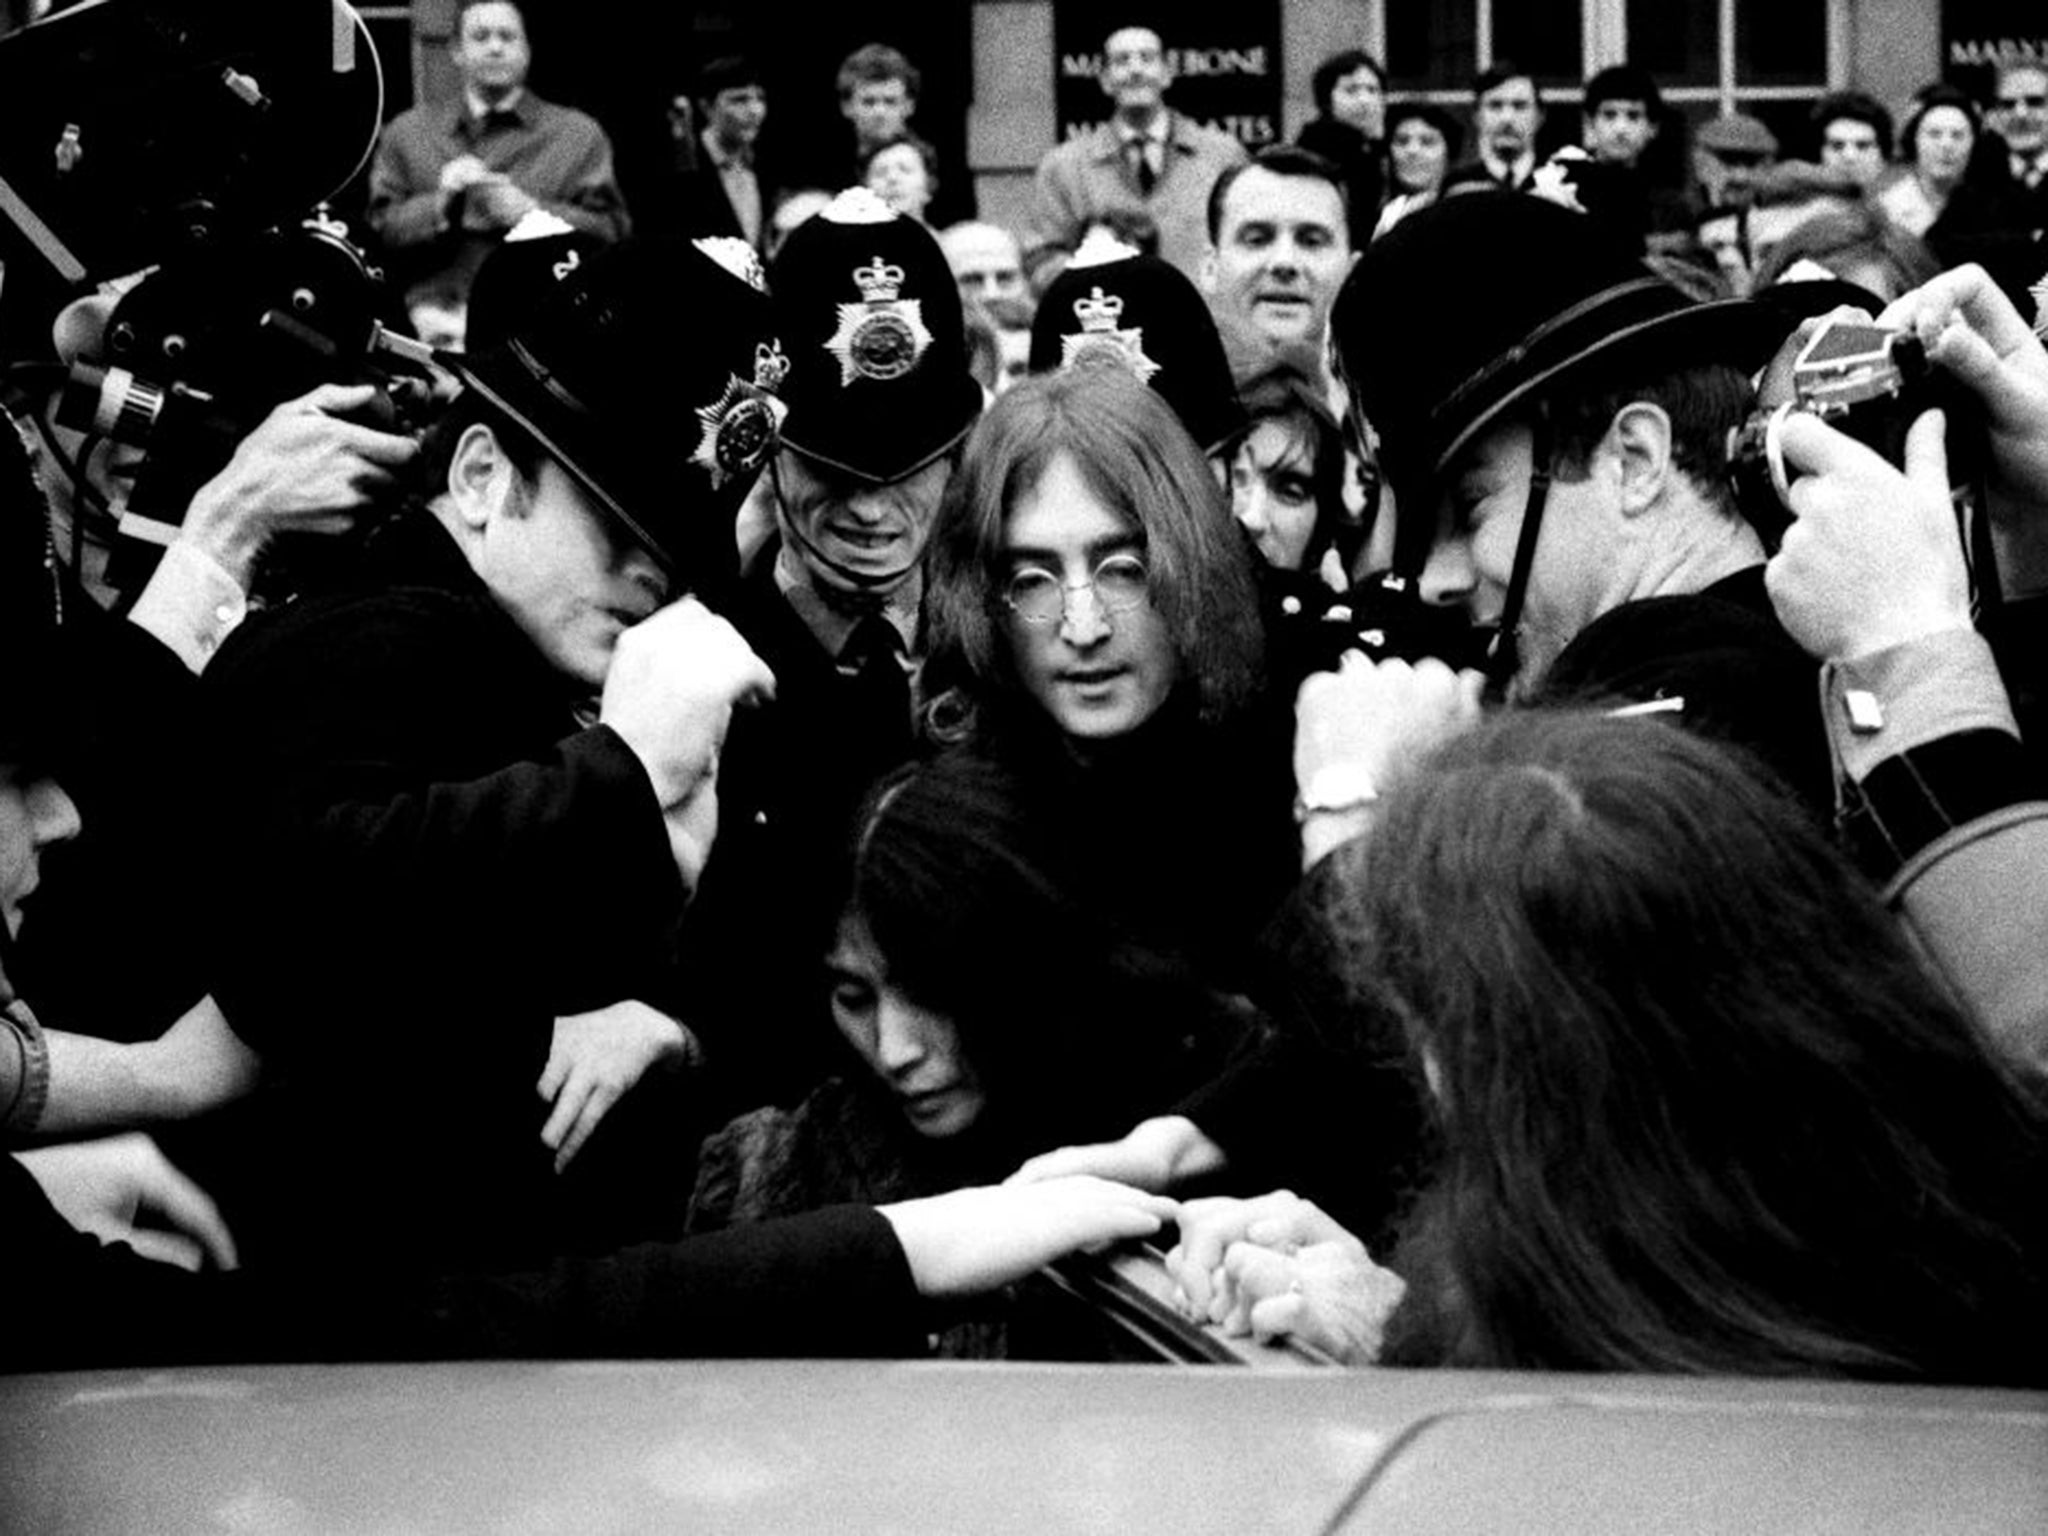 John Lennon and Yoko Ono leave Marylebone Magistrates' Court in London in 1968. The couple were appearing on charges of drug possession